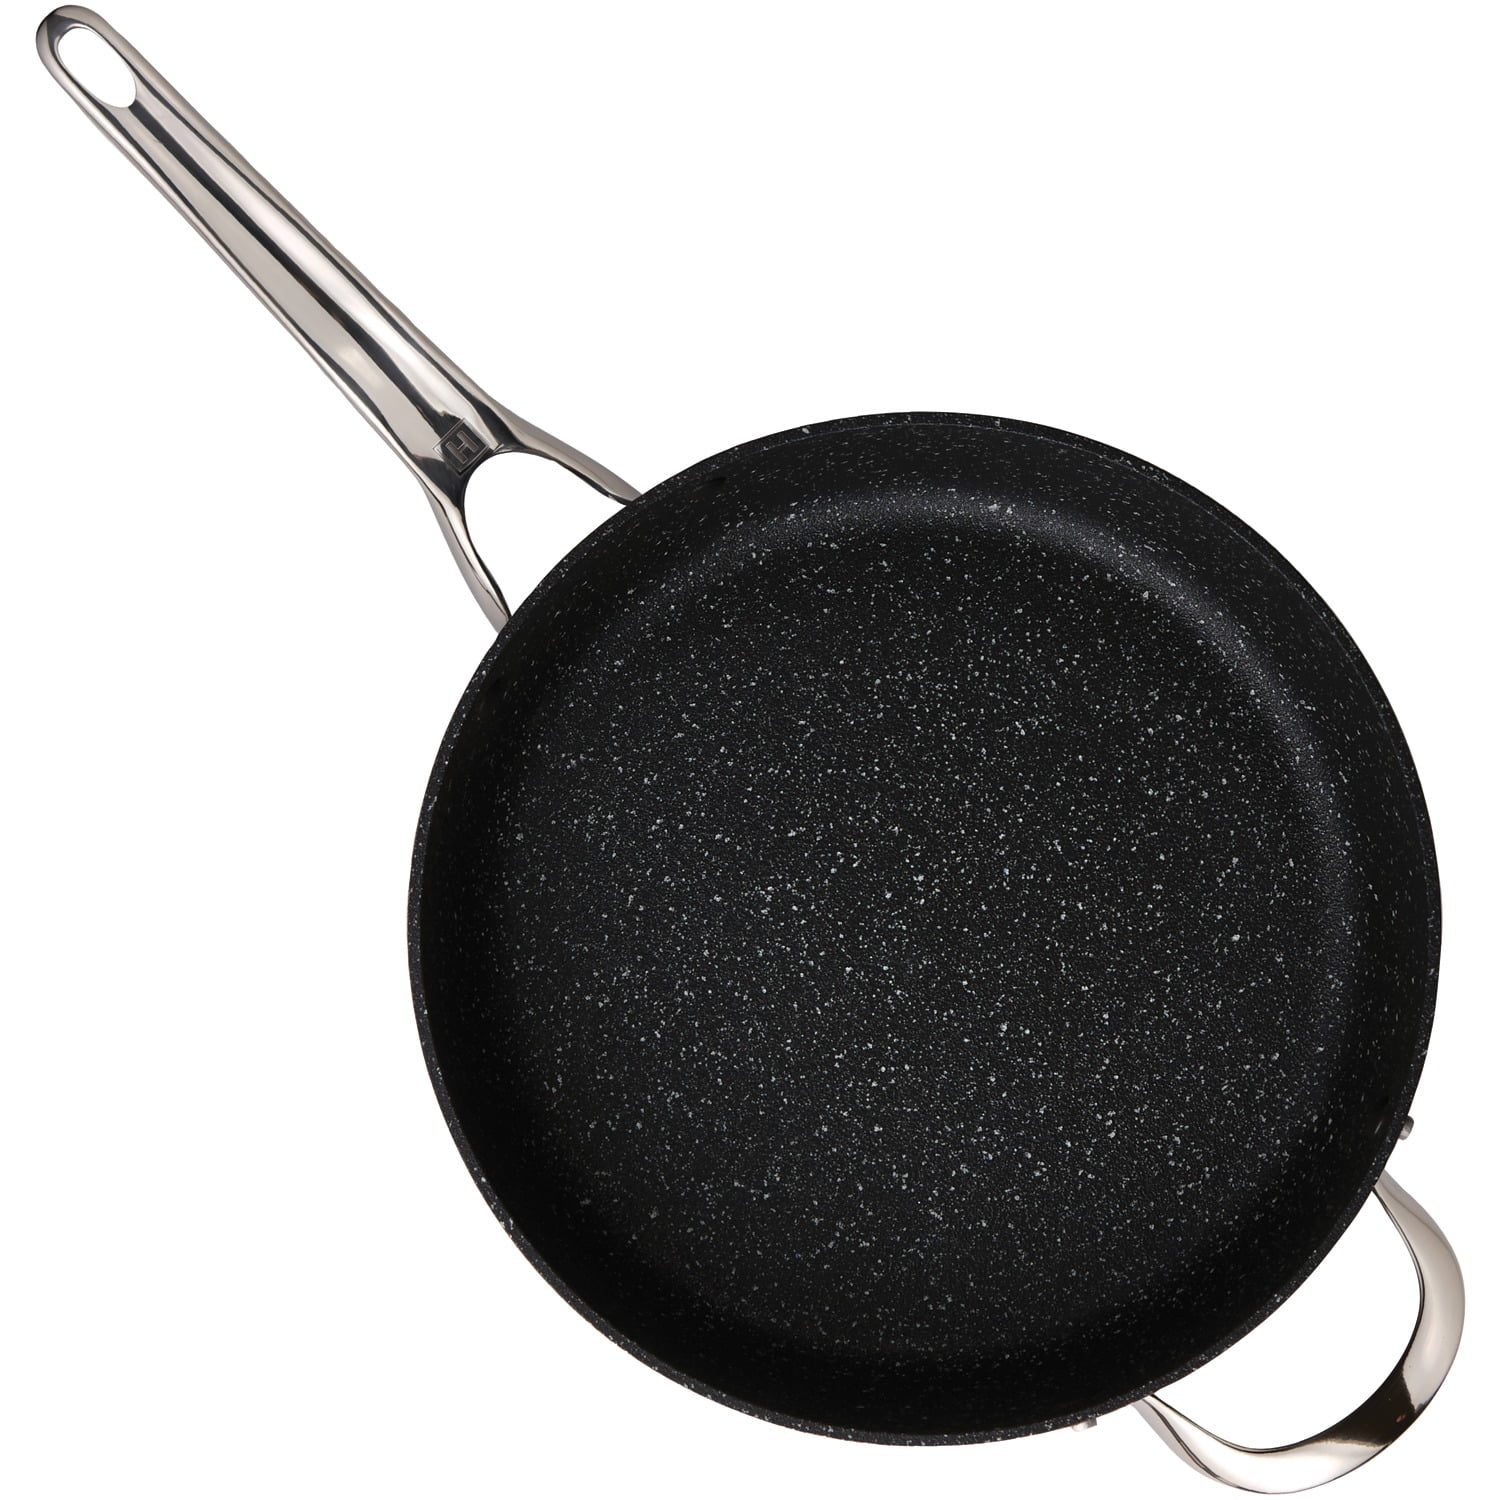 Starfrit The Rock Diamond 11 Inch Fry Pan with Lid